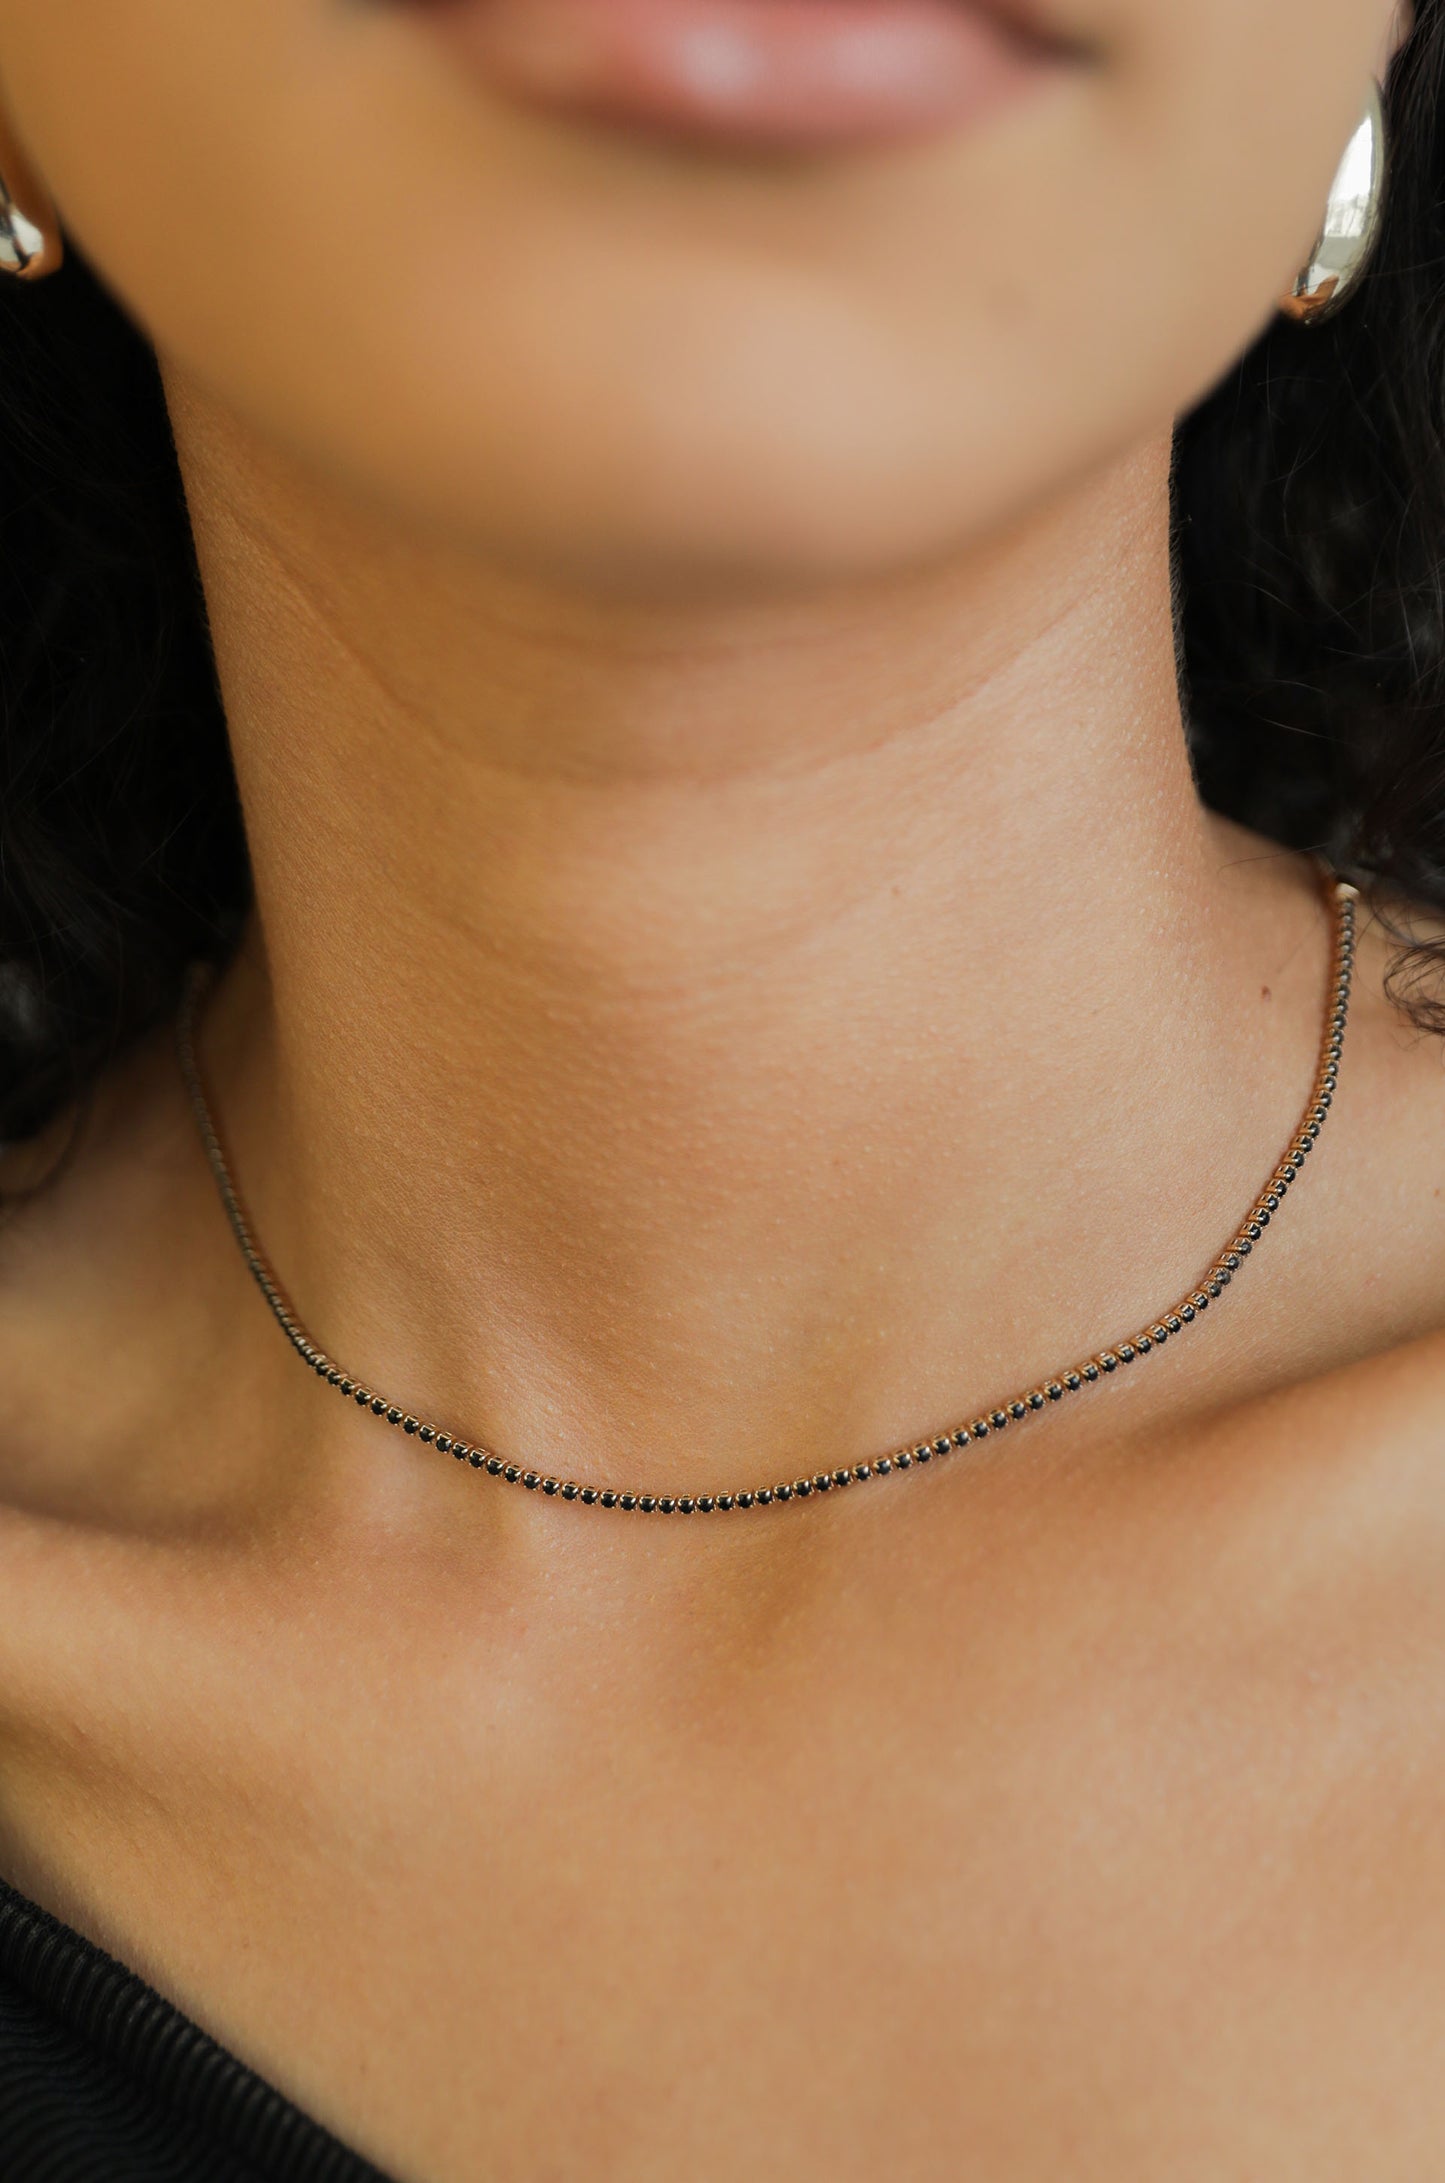 Adjustable Box Chain 18k Gold Plated Choker in black on a model